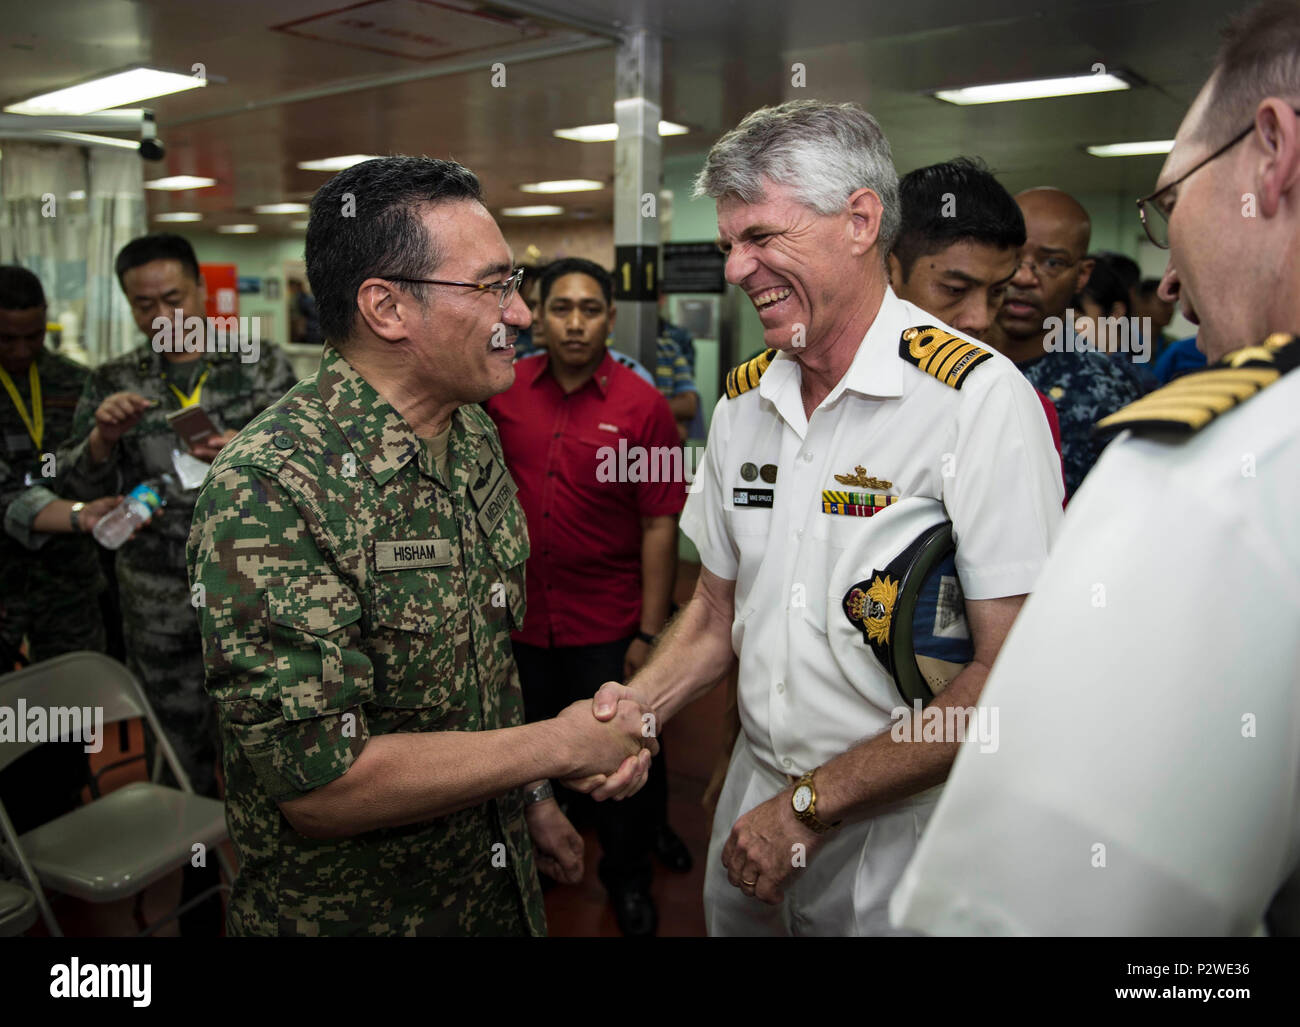 160804-N-QW941-090 KUANTAN, Malaysia (Aug 4, 2016) Royal Australian Navy Reserve Capt. Mike Spruce (right), Pacific Partnership 2016 deputy mission commander, greets Dato’ Seri Hishammuddin Tun Hussein, Minister of Defense, Malaysia, aboard hospital ship USNS Mercy (T-AH 19). While aboard Mercy, Hishammuddin met with Pacific Partnership personnel, toured the ship and participated in a press conference. This is the first time Mercy and Pacific Partnership have visited Malaysia. During the mission stop partner nations work side-by-side with local military and civilian organizations in a search a Stock Photo